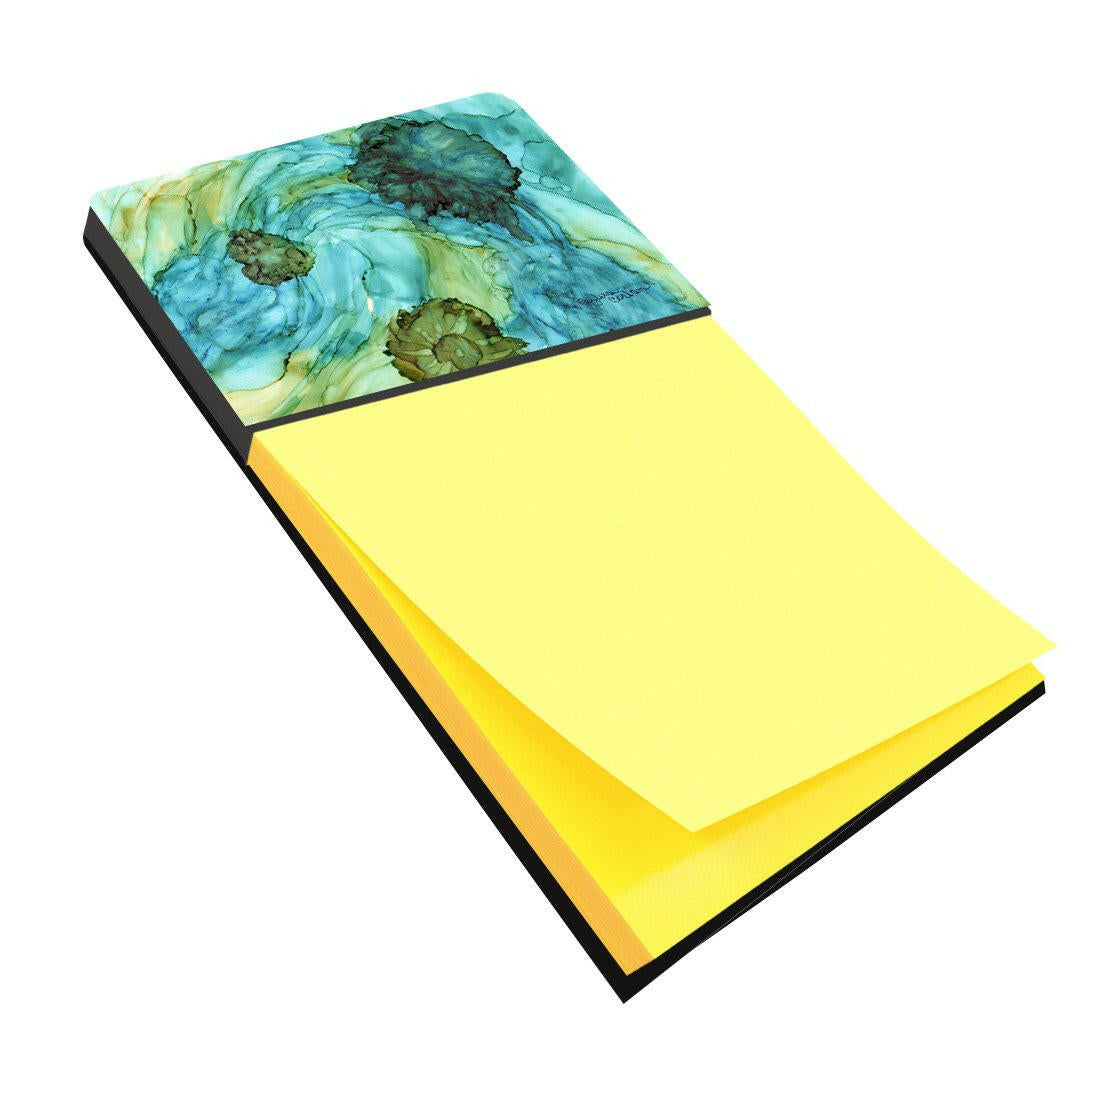 Abstract in Teal Flowers Sticky Note Holder 8952SN by Caroline's Treasures